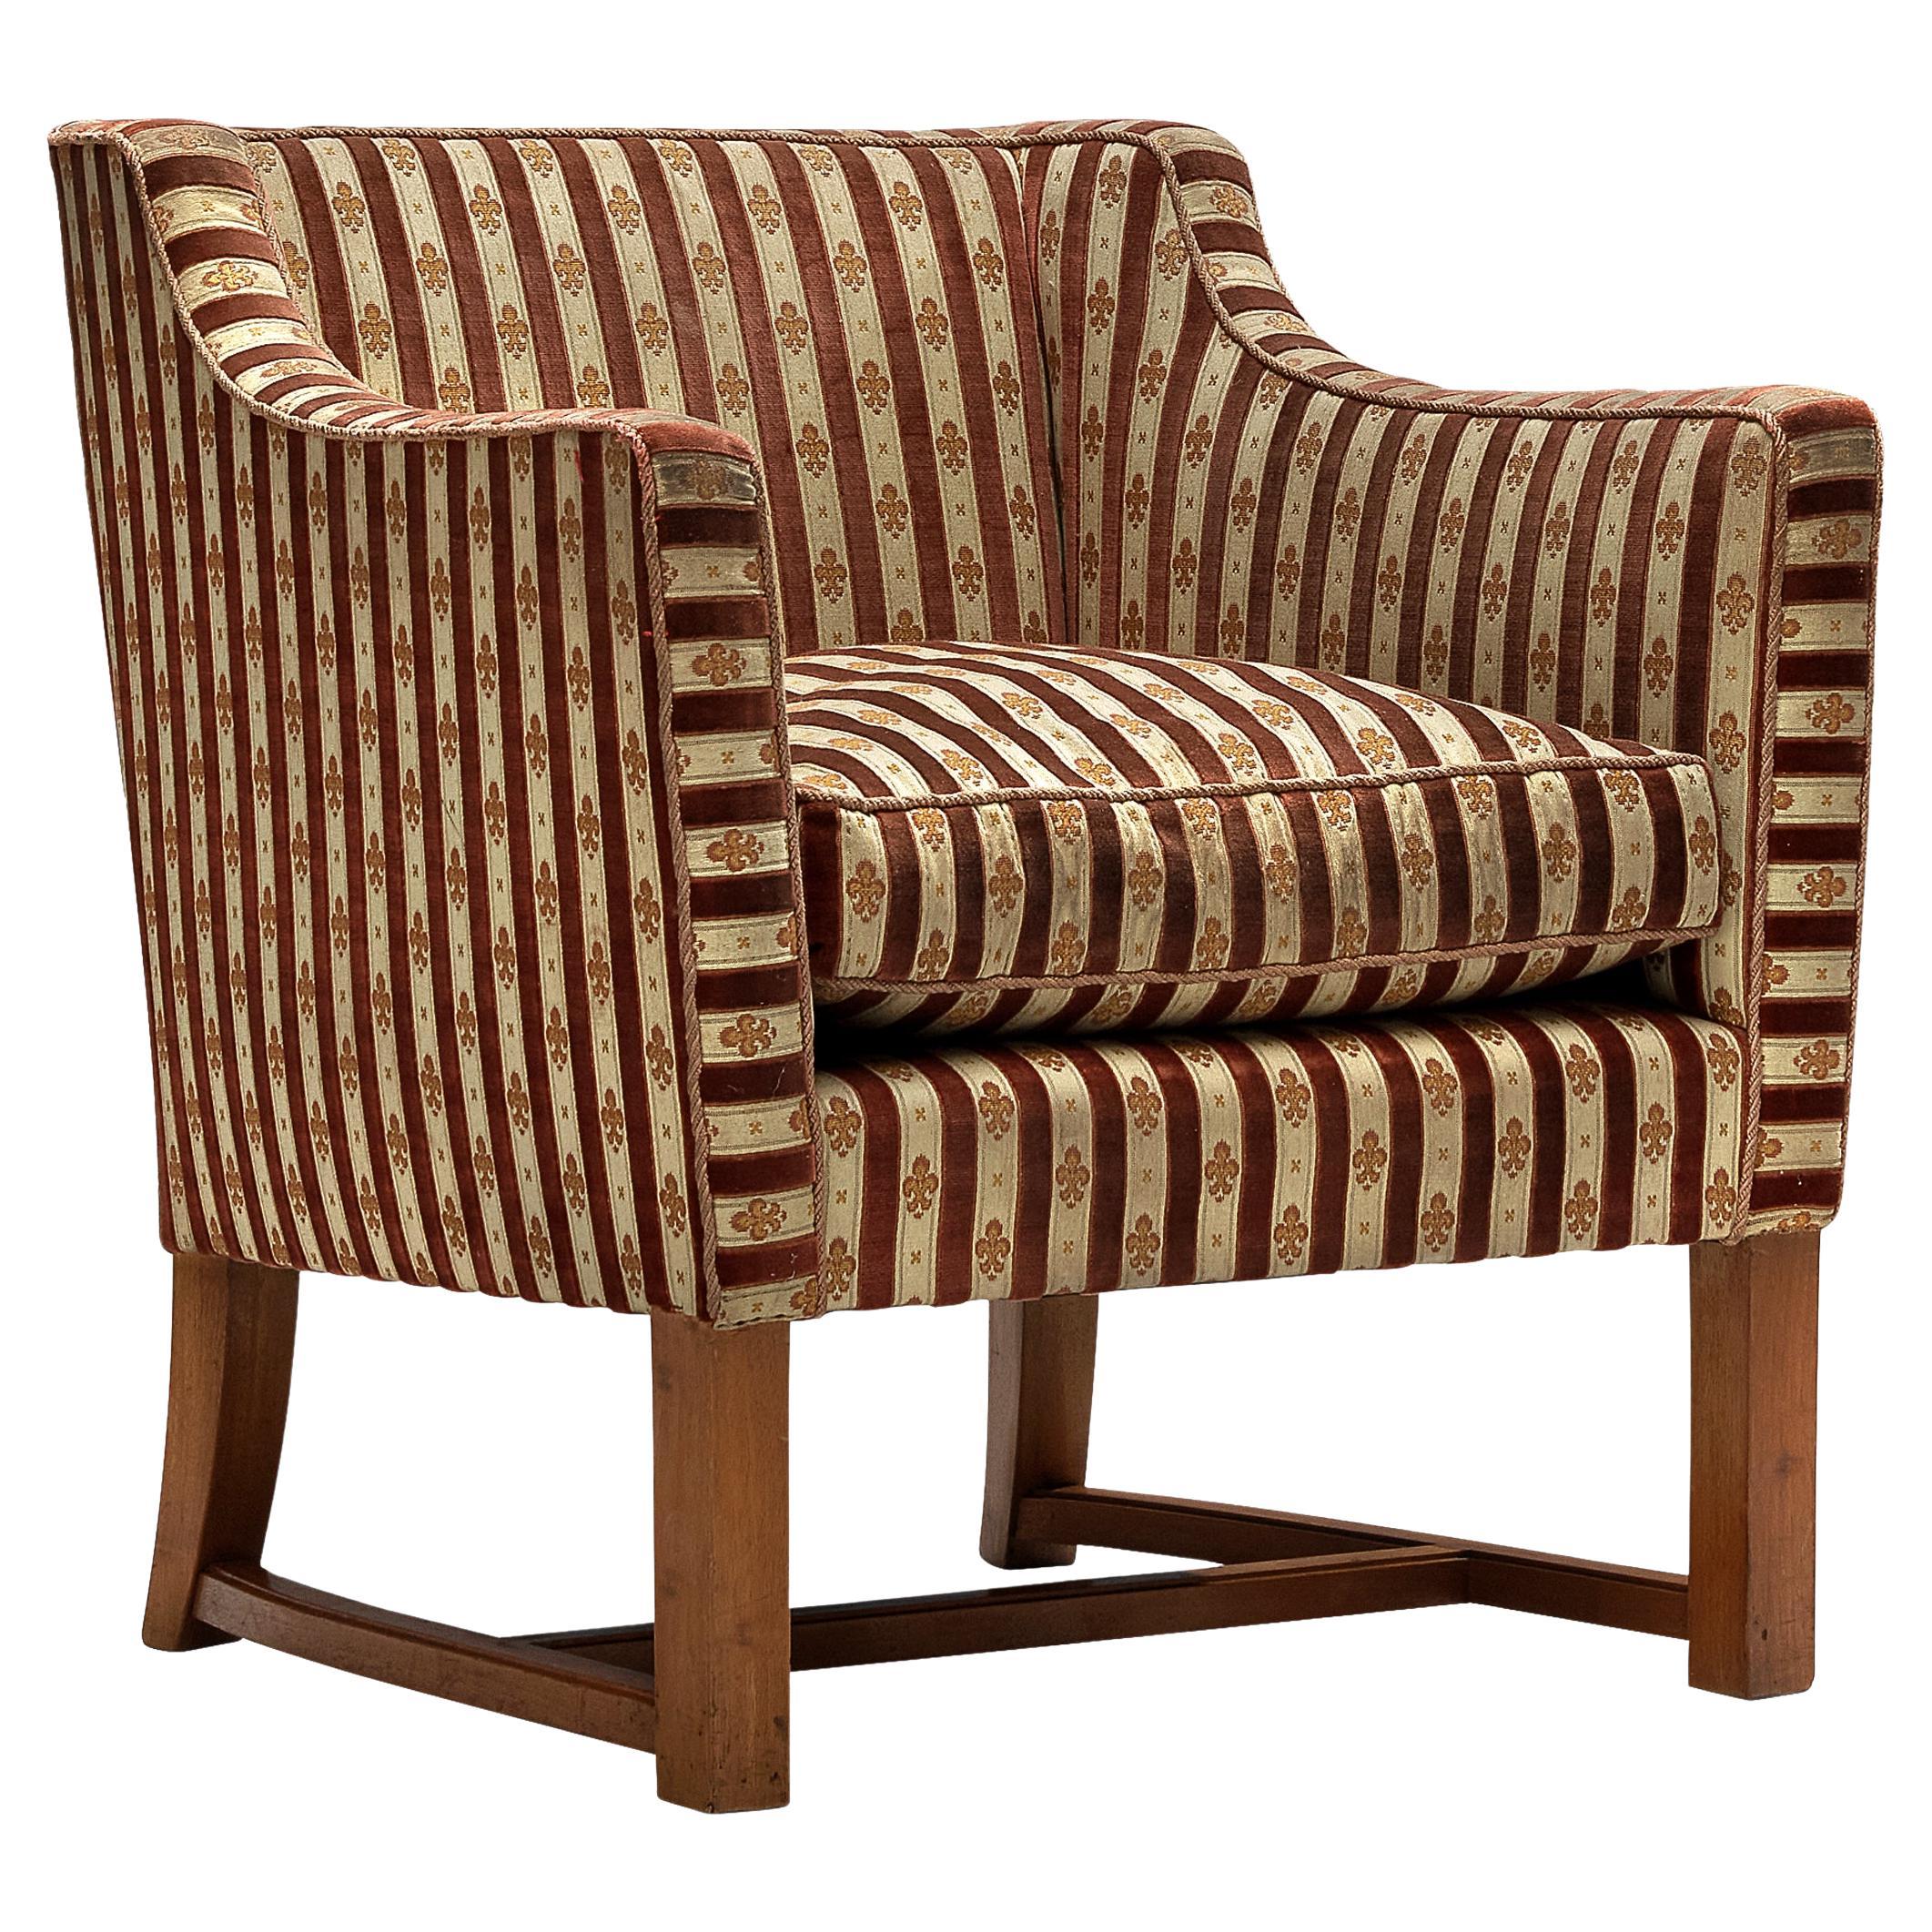 Art Deco Armchair in Red Striped Fleurs de Lis Patterned Upholstery 